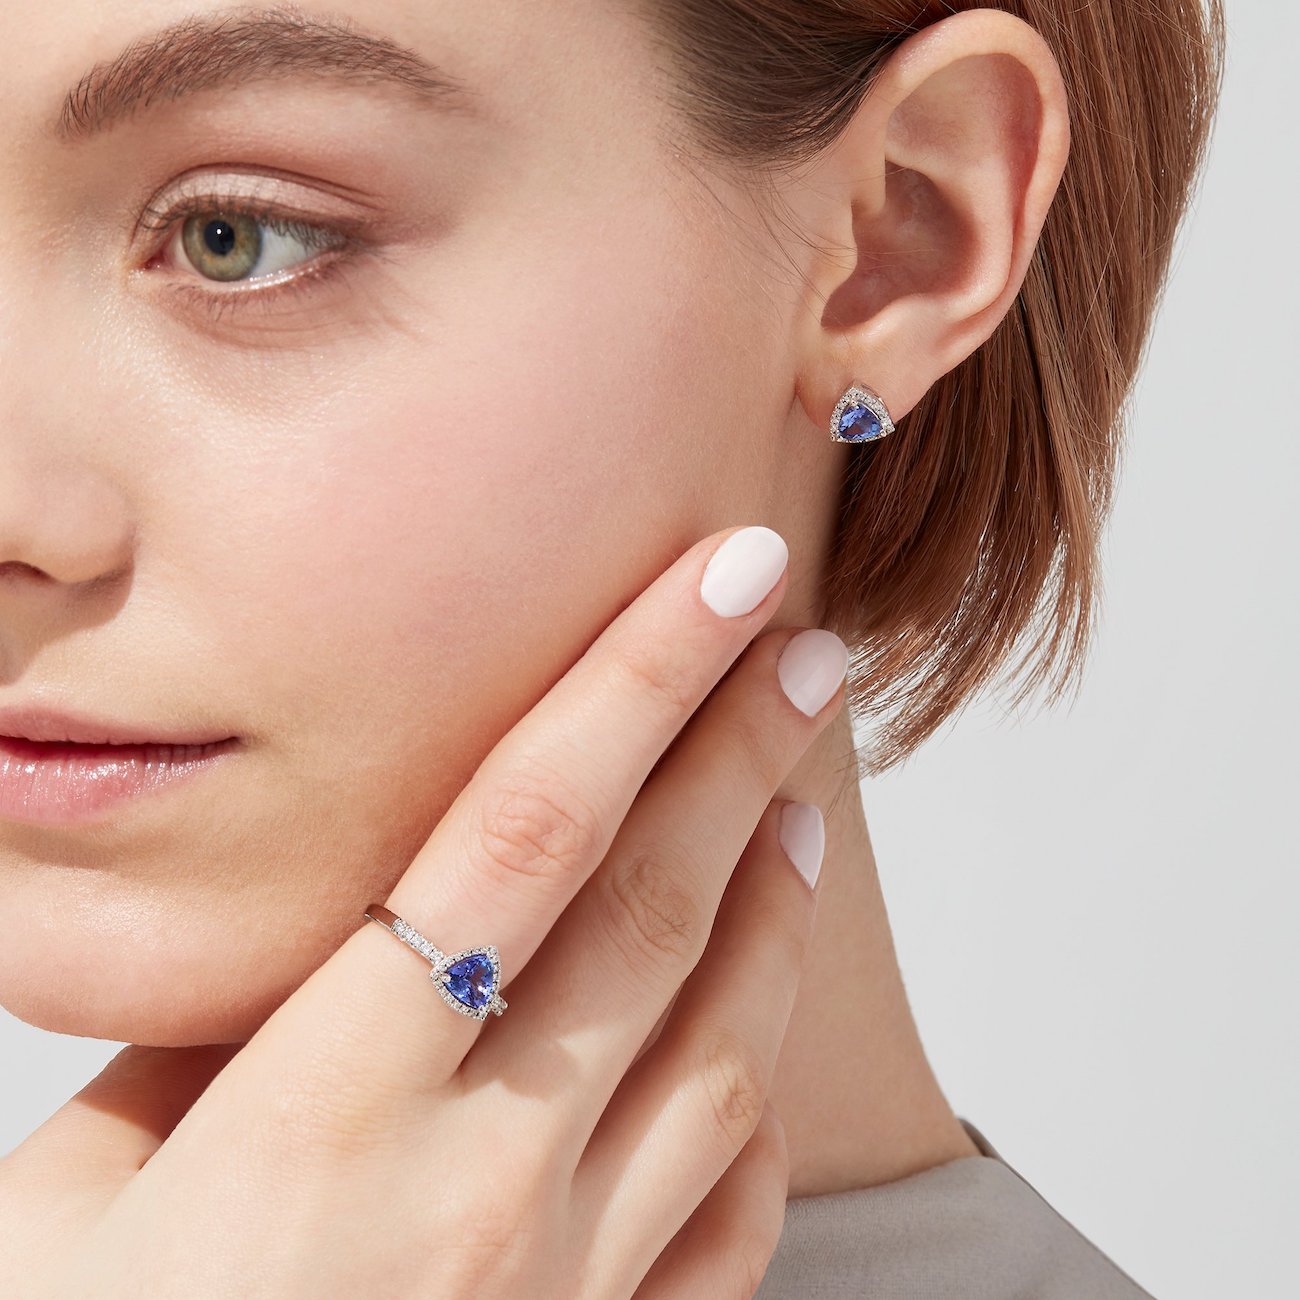 Tanzanite is a gorgeous stone. If you're lucky enough to own this gem, you should take excellent care of it. Keep your jewelry safe with these tips!